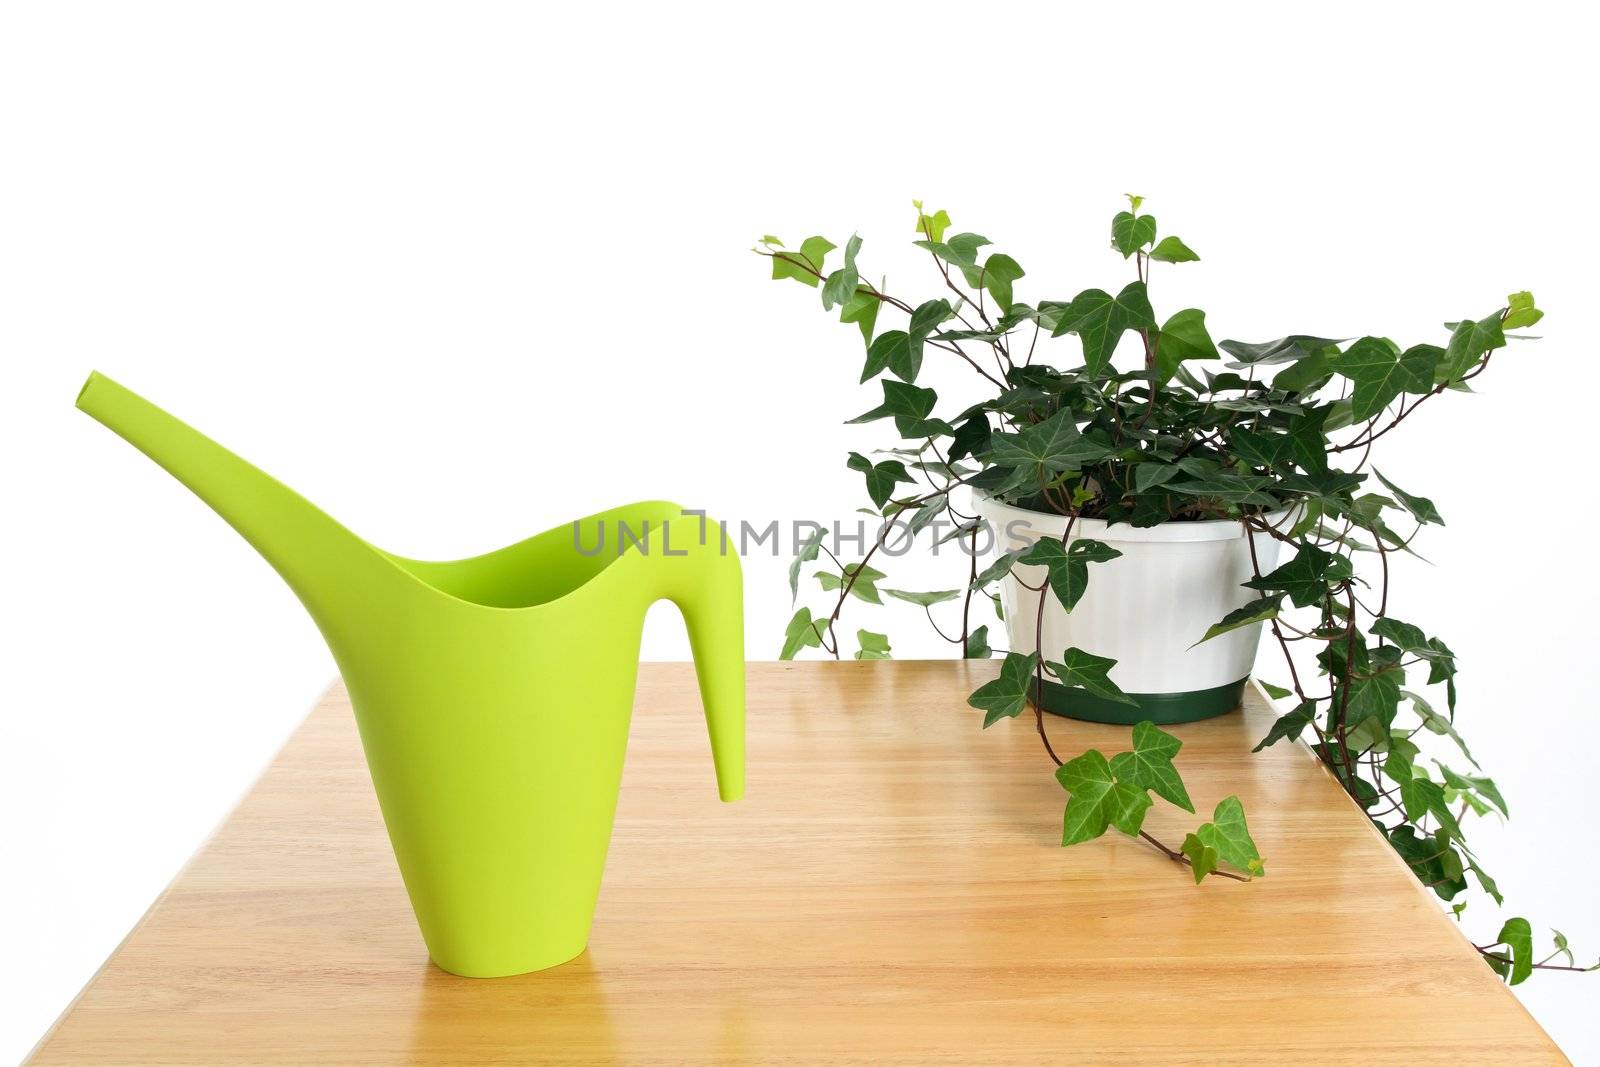 Green watering can and ivy in pot, on white background.